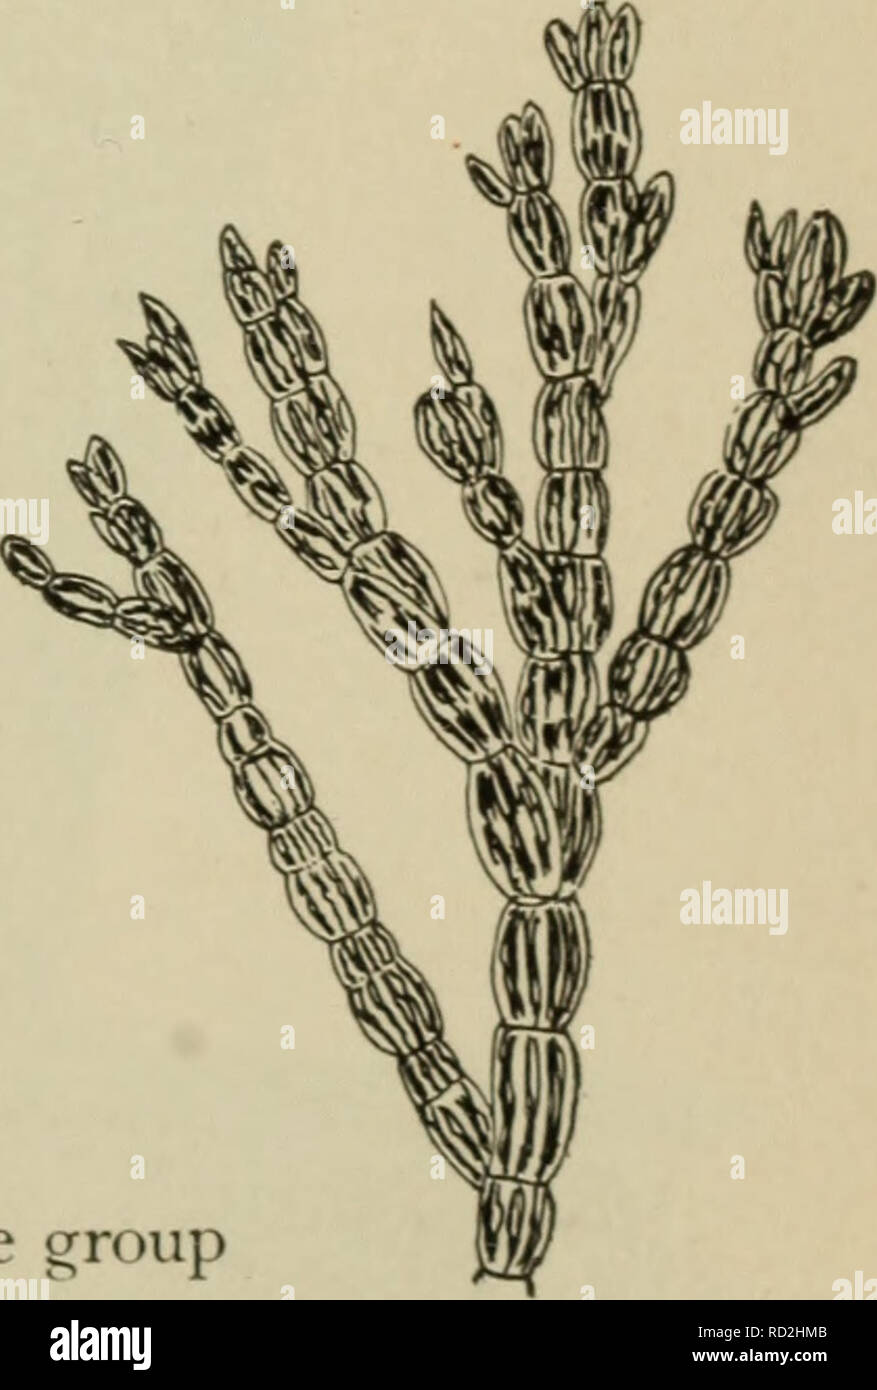 . Elementary botany. Botany. produce the vegetative thread of oedogonium directly, but first forms four zoospores, each of which is then capable of developing into the thread. On the other hand we found that in spirogyra the zygo- spore develops directly into the thread form of the plant. 245. Position of oedo- gonium.—CEdogonium is one of the true thread-like algae, green in color, and the threads are divided into distinct cells. It. along with many relatives, was once placed in the old genus conferva. These are all now placed in the group CcmfervoidecE, that is, the conferva-like algcr. 246. Stock Photo